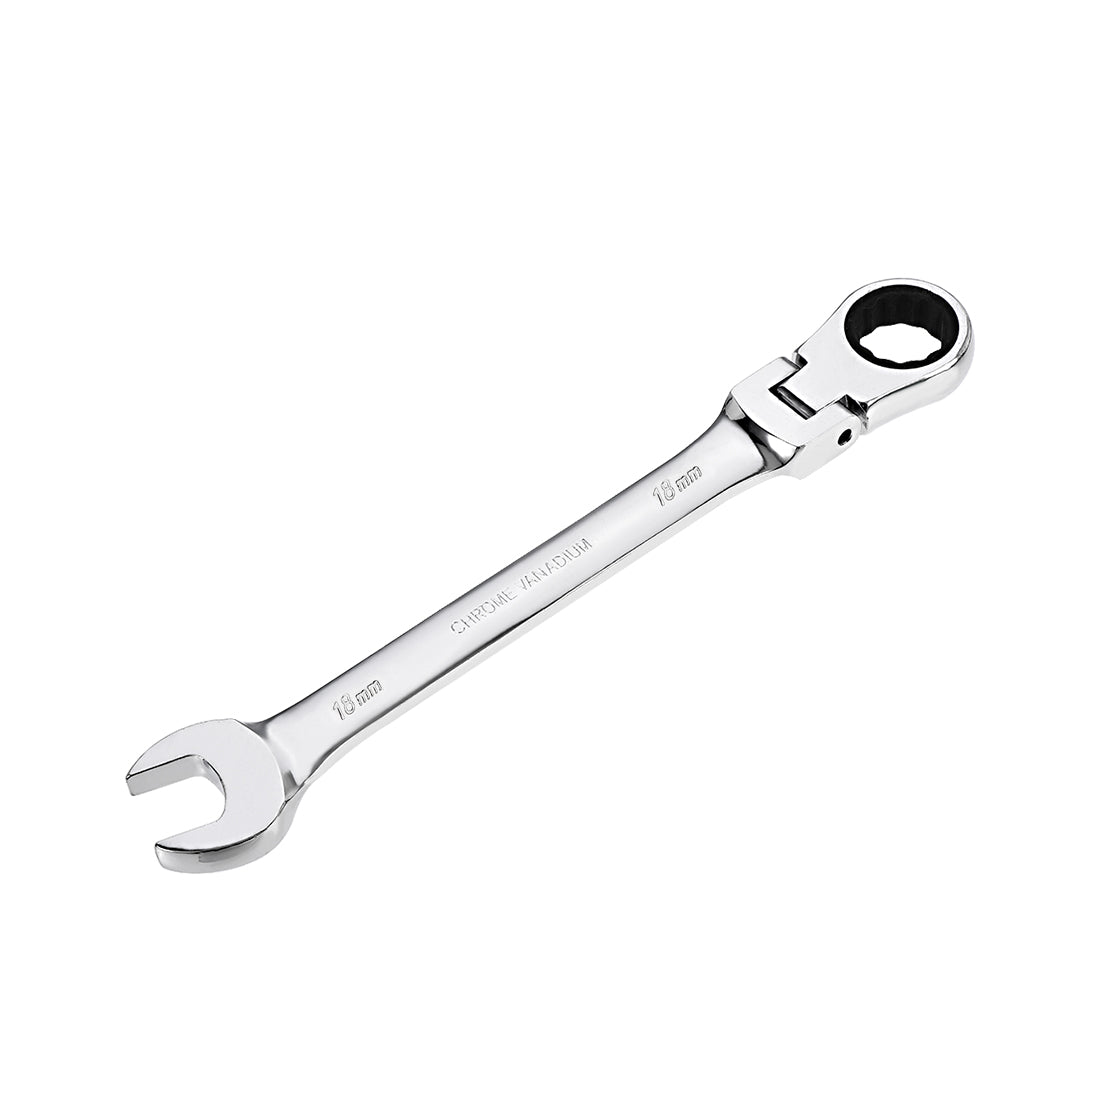 uxcell Uxcell Flex-Head Ratcheting Combination Wrench Metric 72 Teeth 12 Point Ratchet Box Ended Spanner Tools, Cr-V